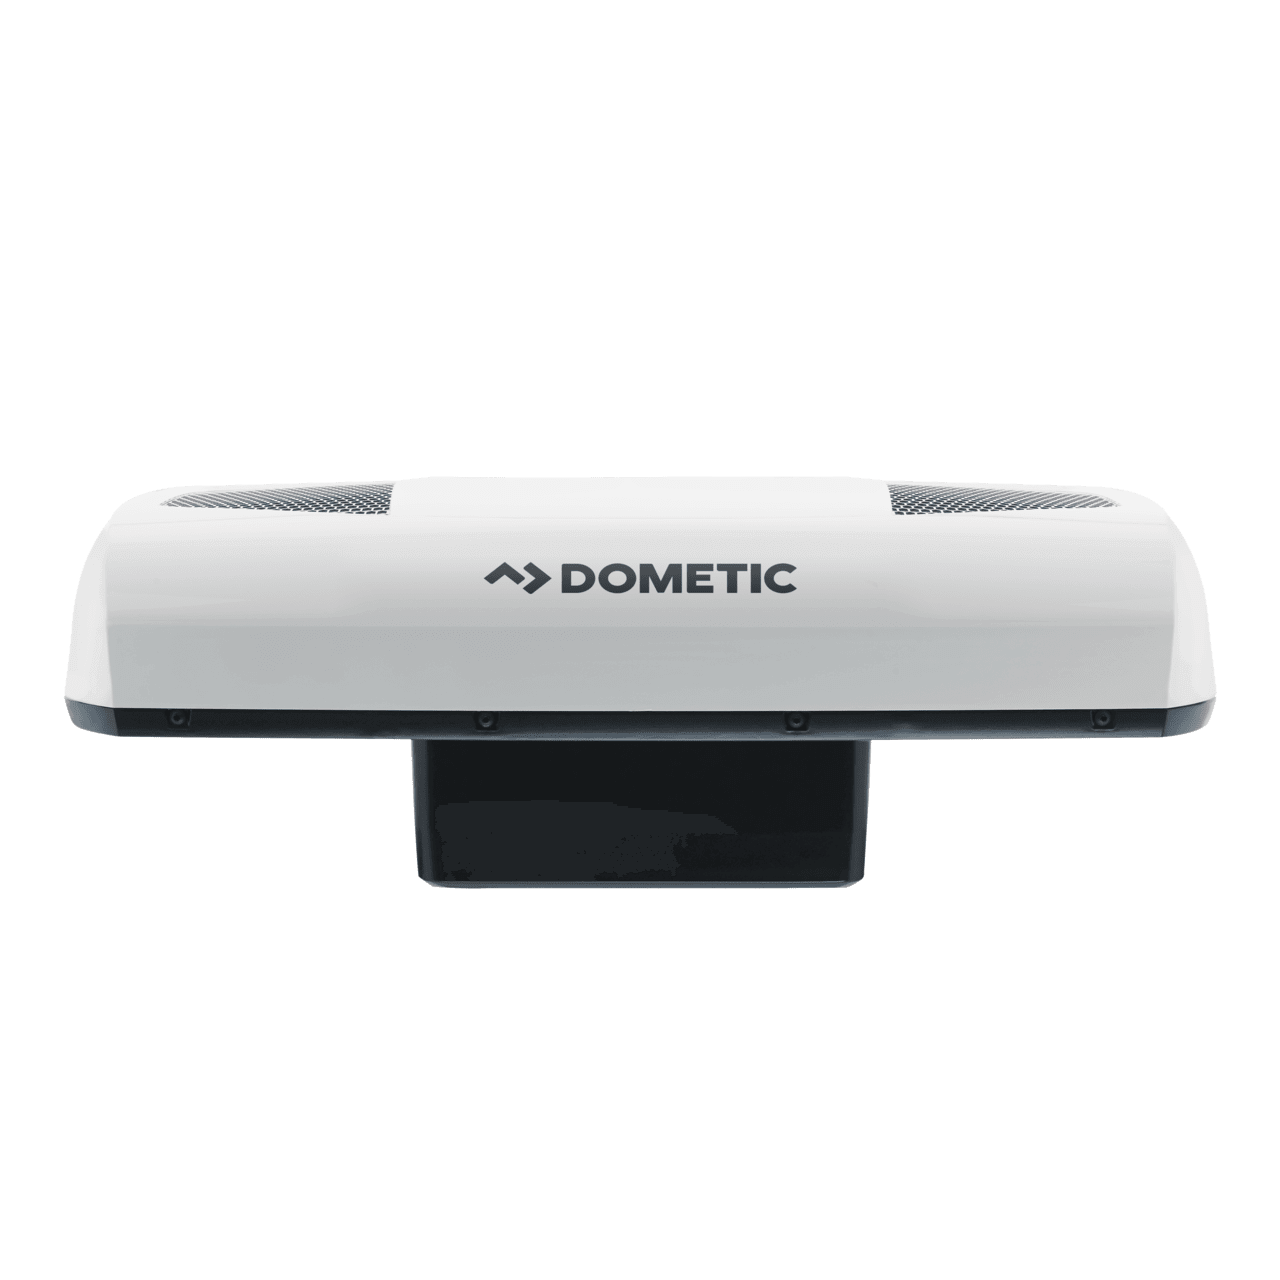 Dometic RTX 2000 1000 12V air conditioning unit coolair air con front view